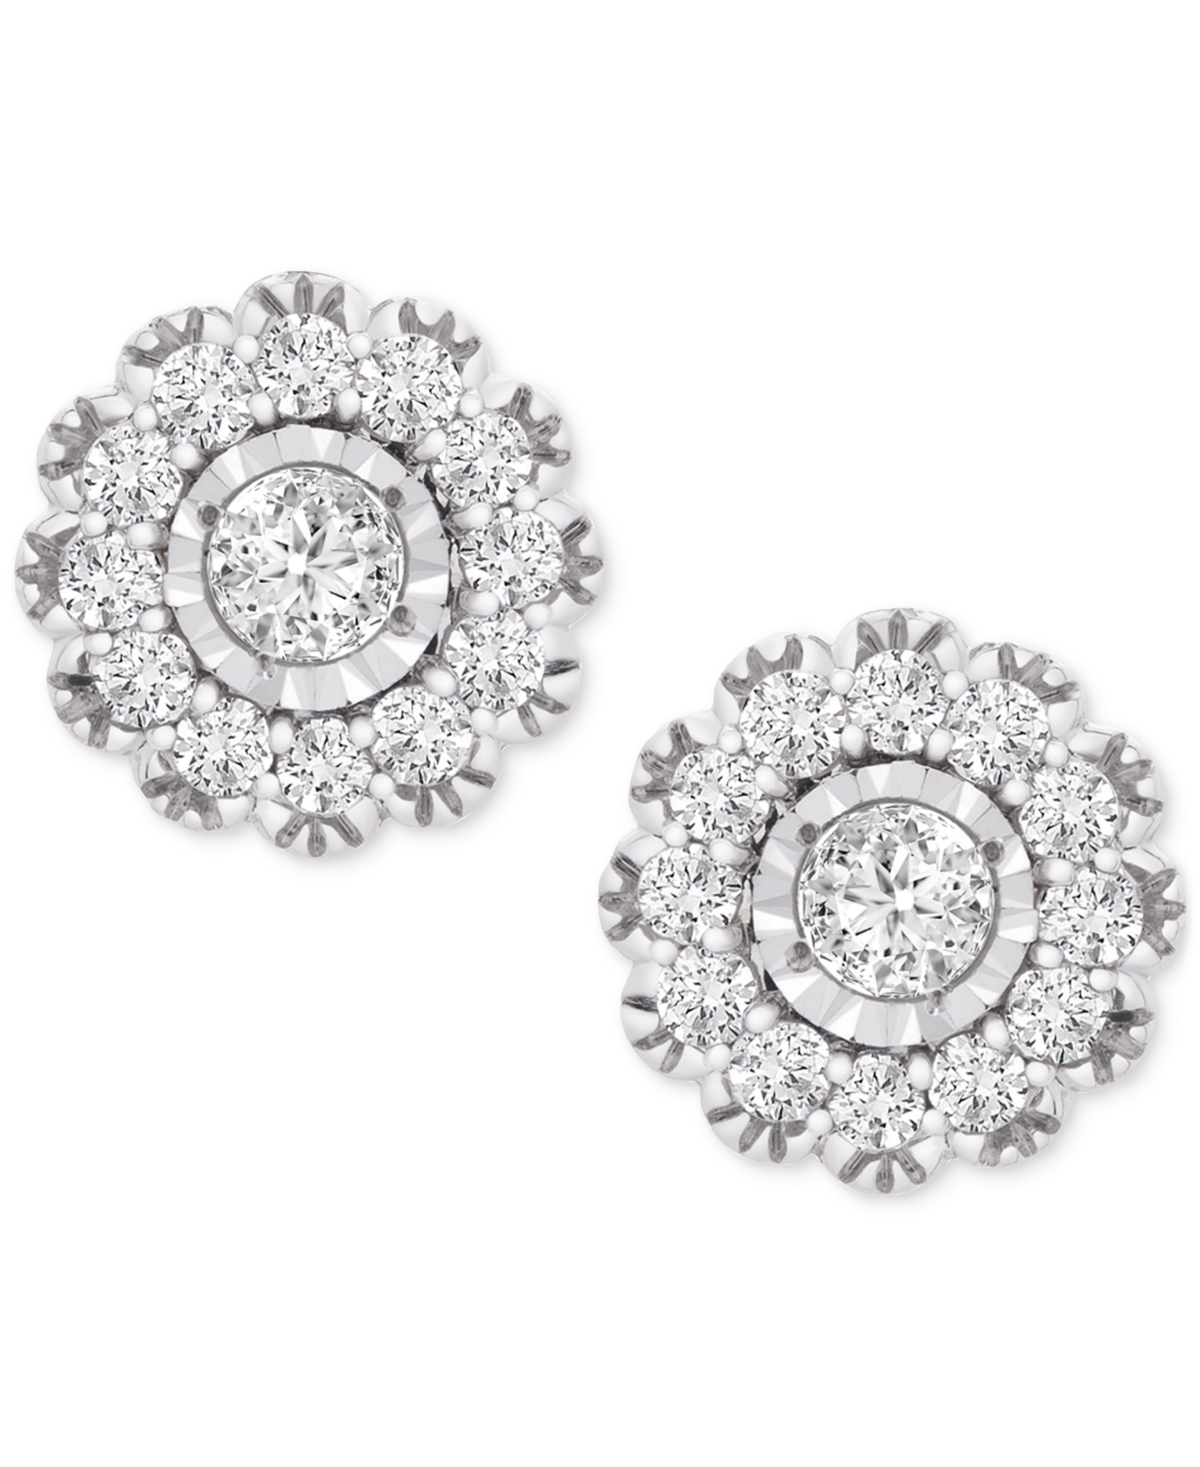 Shop Wrapped In Love Diamond Flower Stud Earrings (1/2 Ct. Tw) In 14k White Gold, Created For Macy's